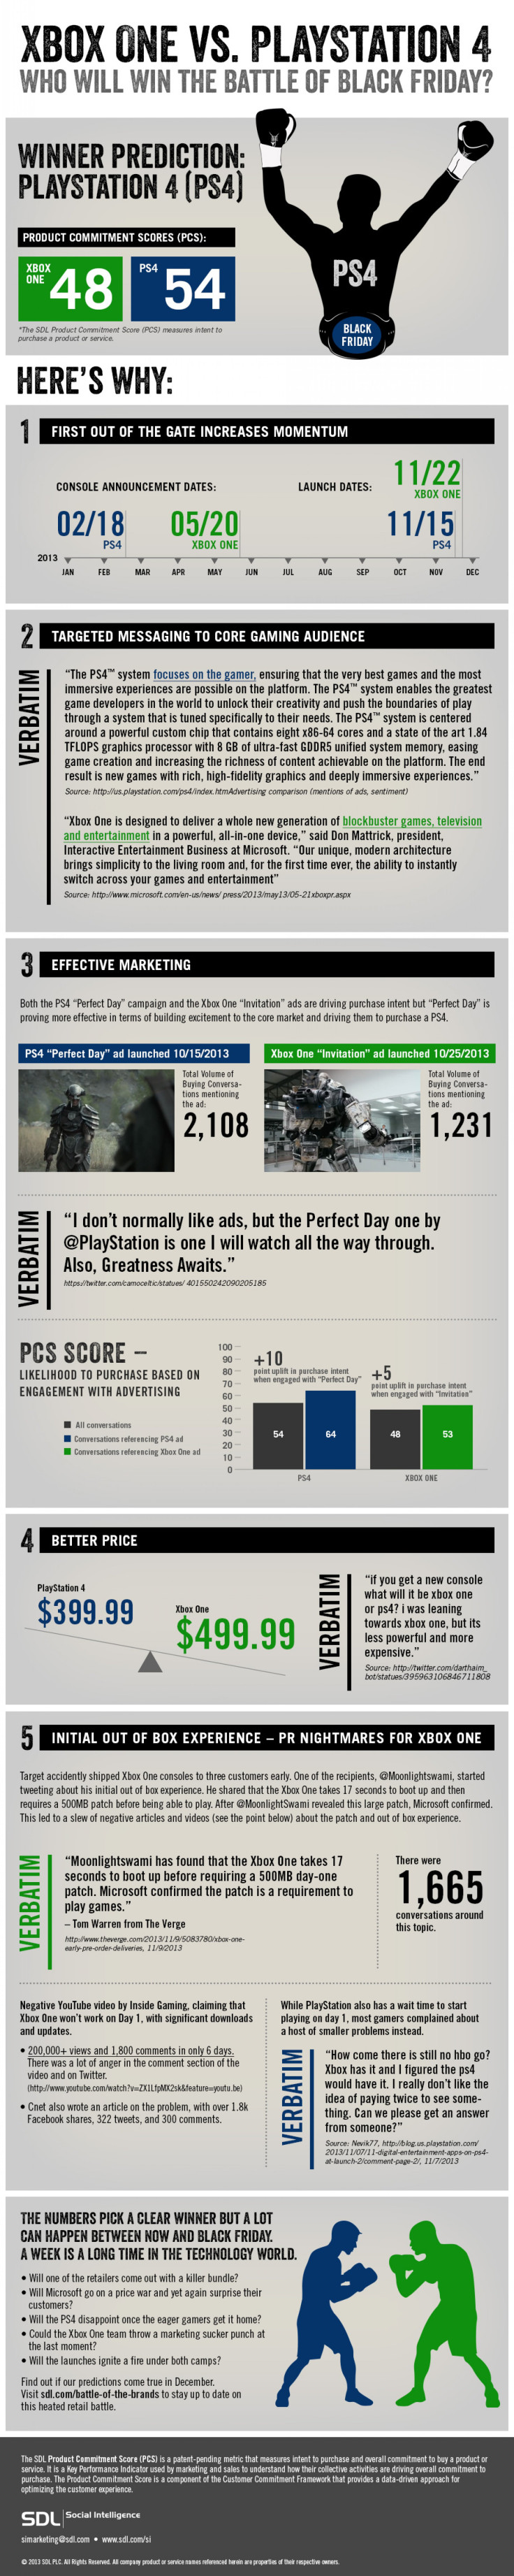 SDL Xbox One Vs. PlayStation 4 (PS4) infographic